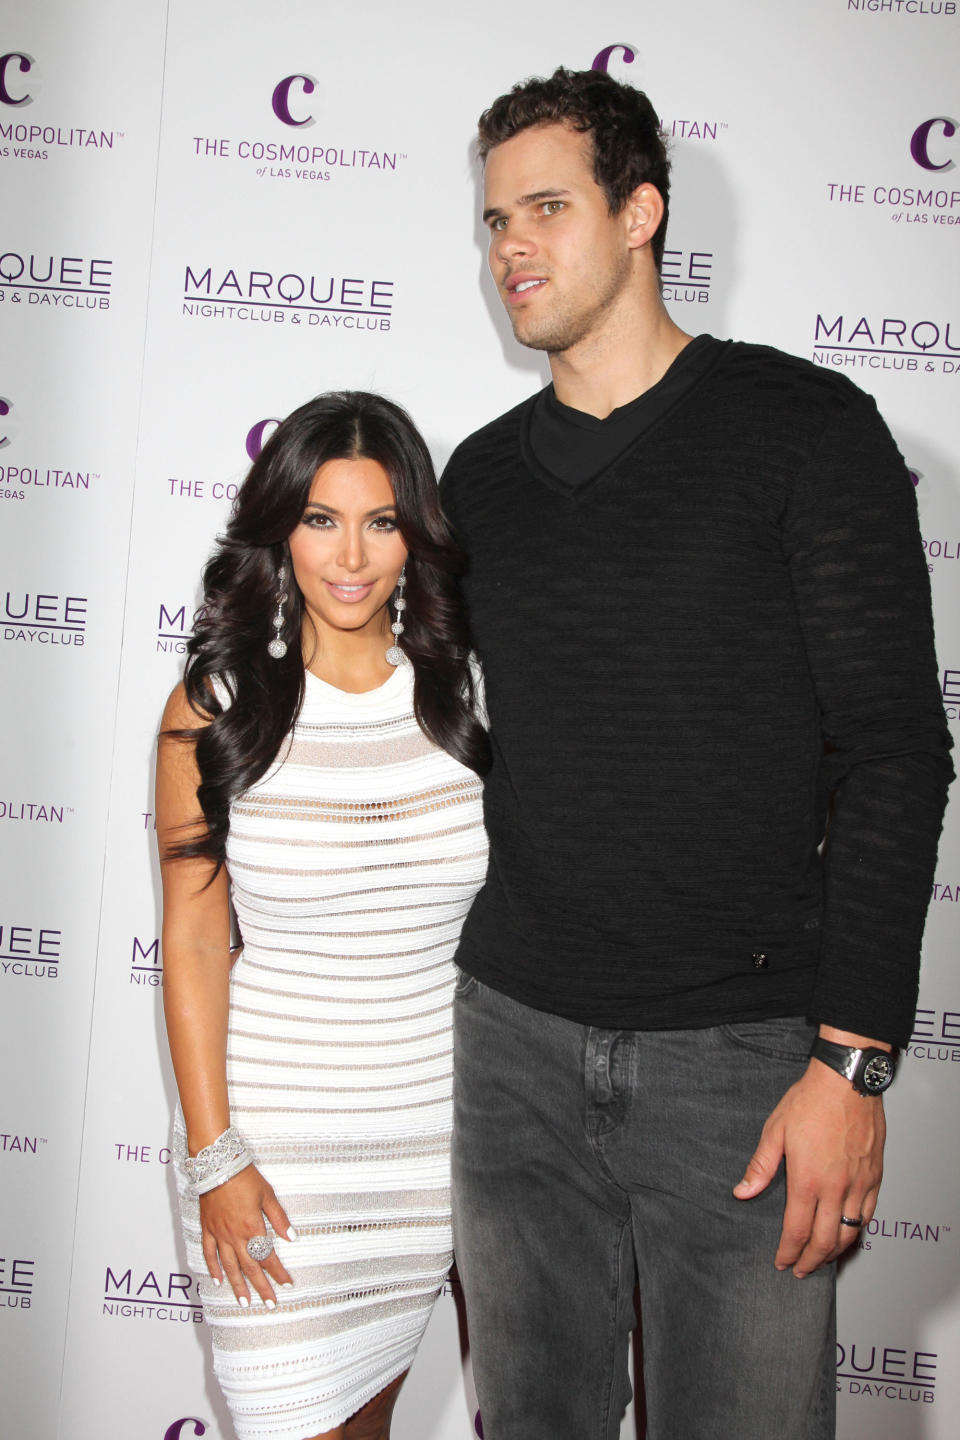 Following a lavish wedding ceremony which was filmed for 'Keeping Up With The Kardashians', Kim filed for divorce from her second husband Kris Humphries after just 72 days.  She's now engaged to rapper Kanye West.